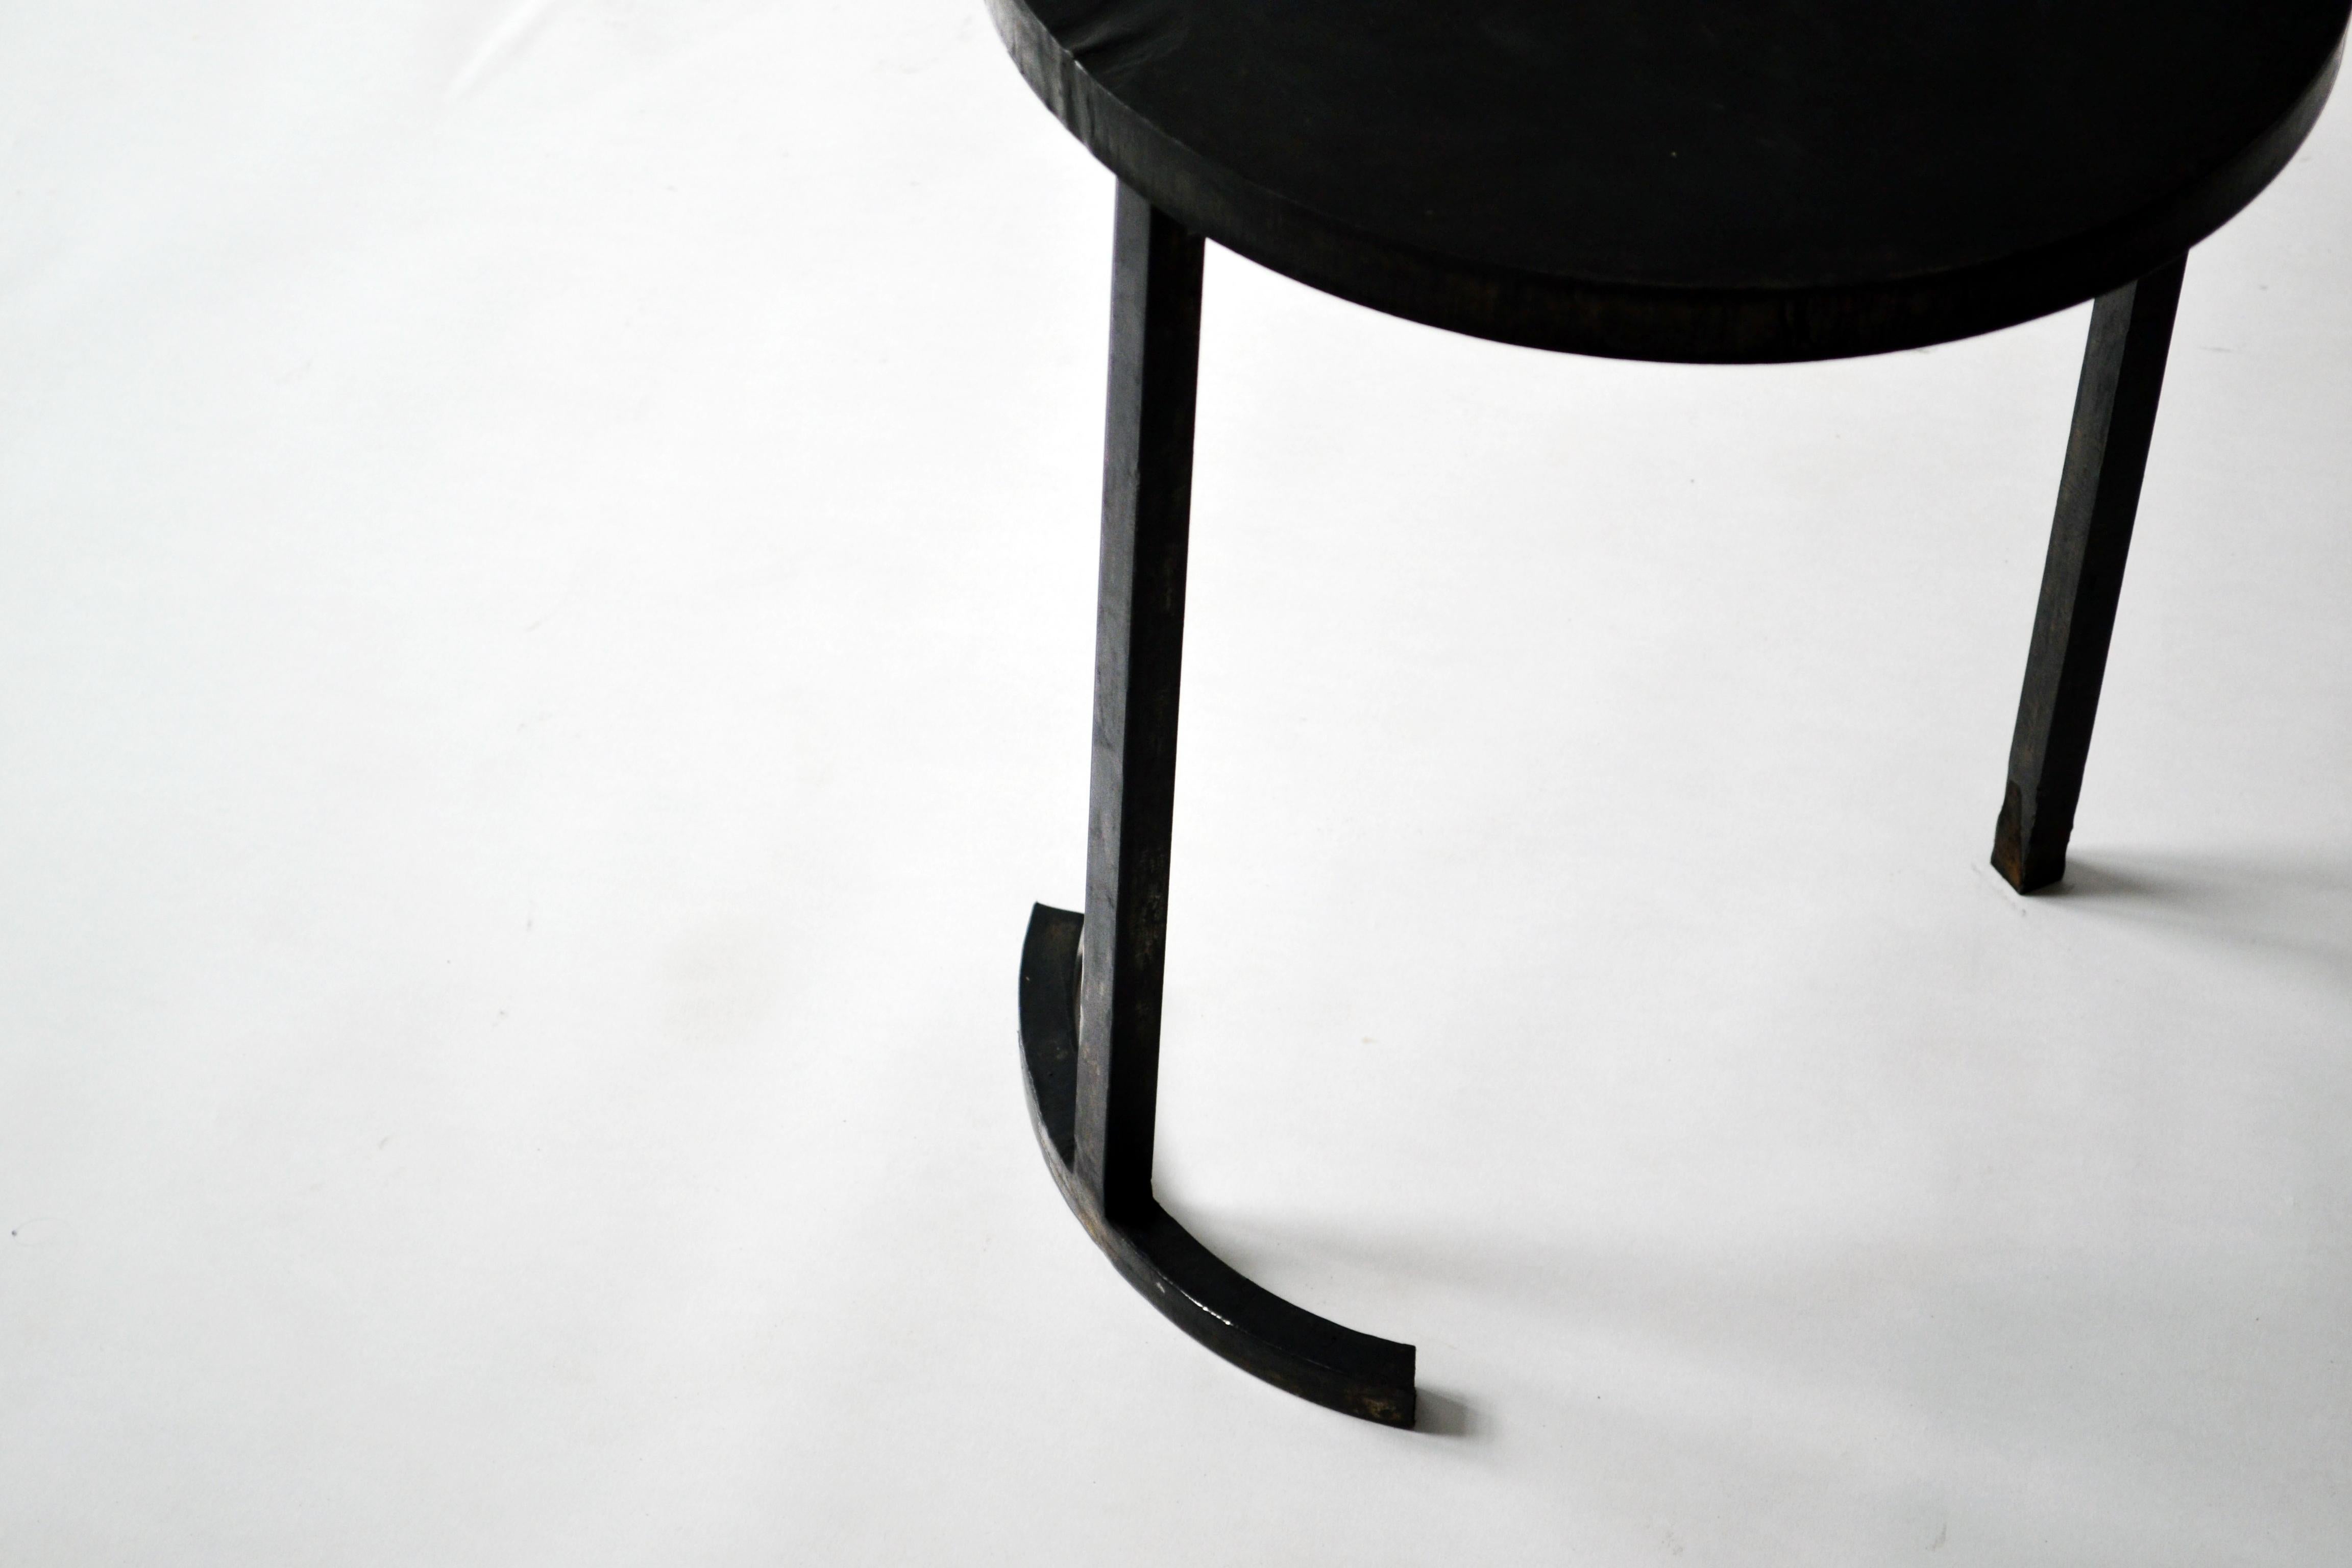 Forged Pair of Modern Side Tables Minimalist Handmade in Cast Blackened and Waxed Steel For Sale